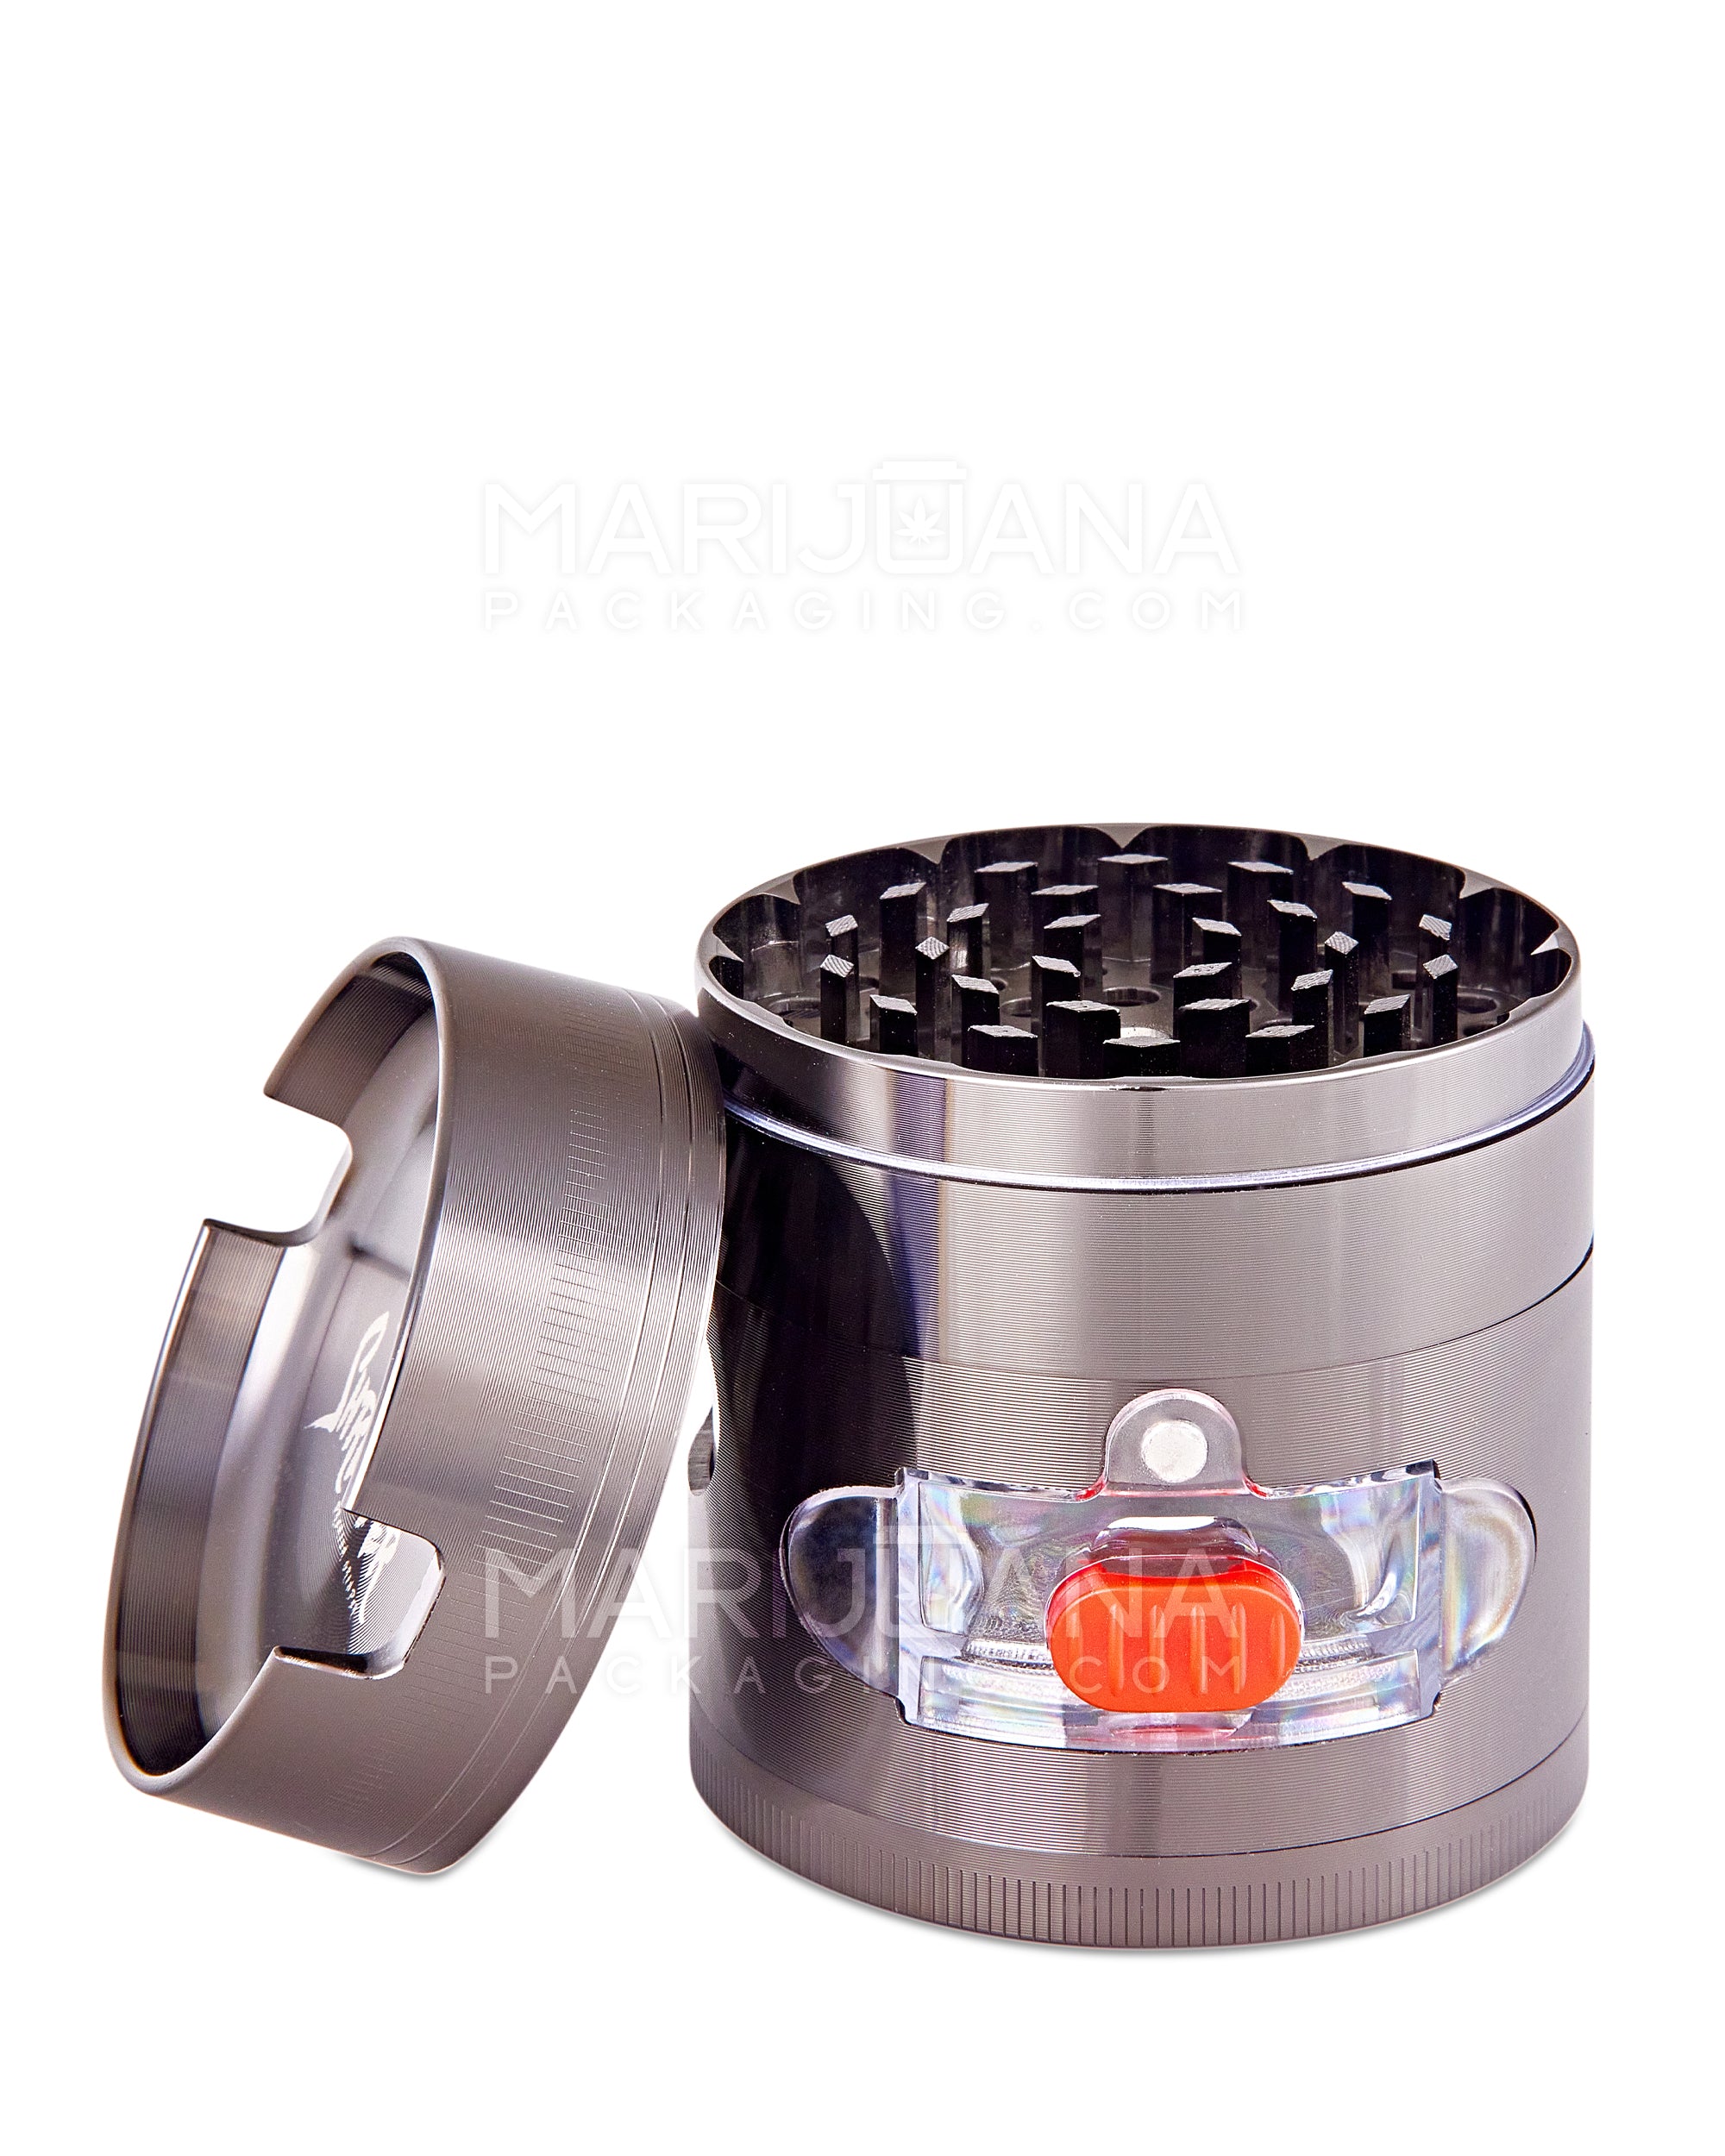 SHREDDER, Magnetic Metal Grinder w/ Pull Out Tray & Catcher